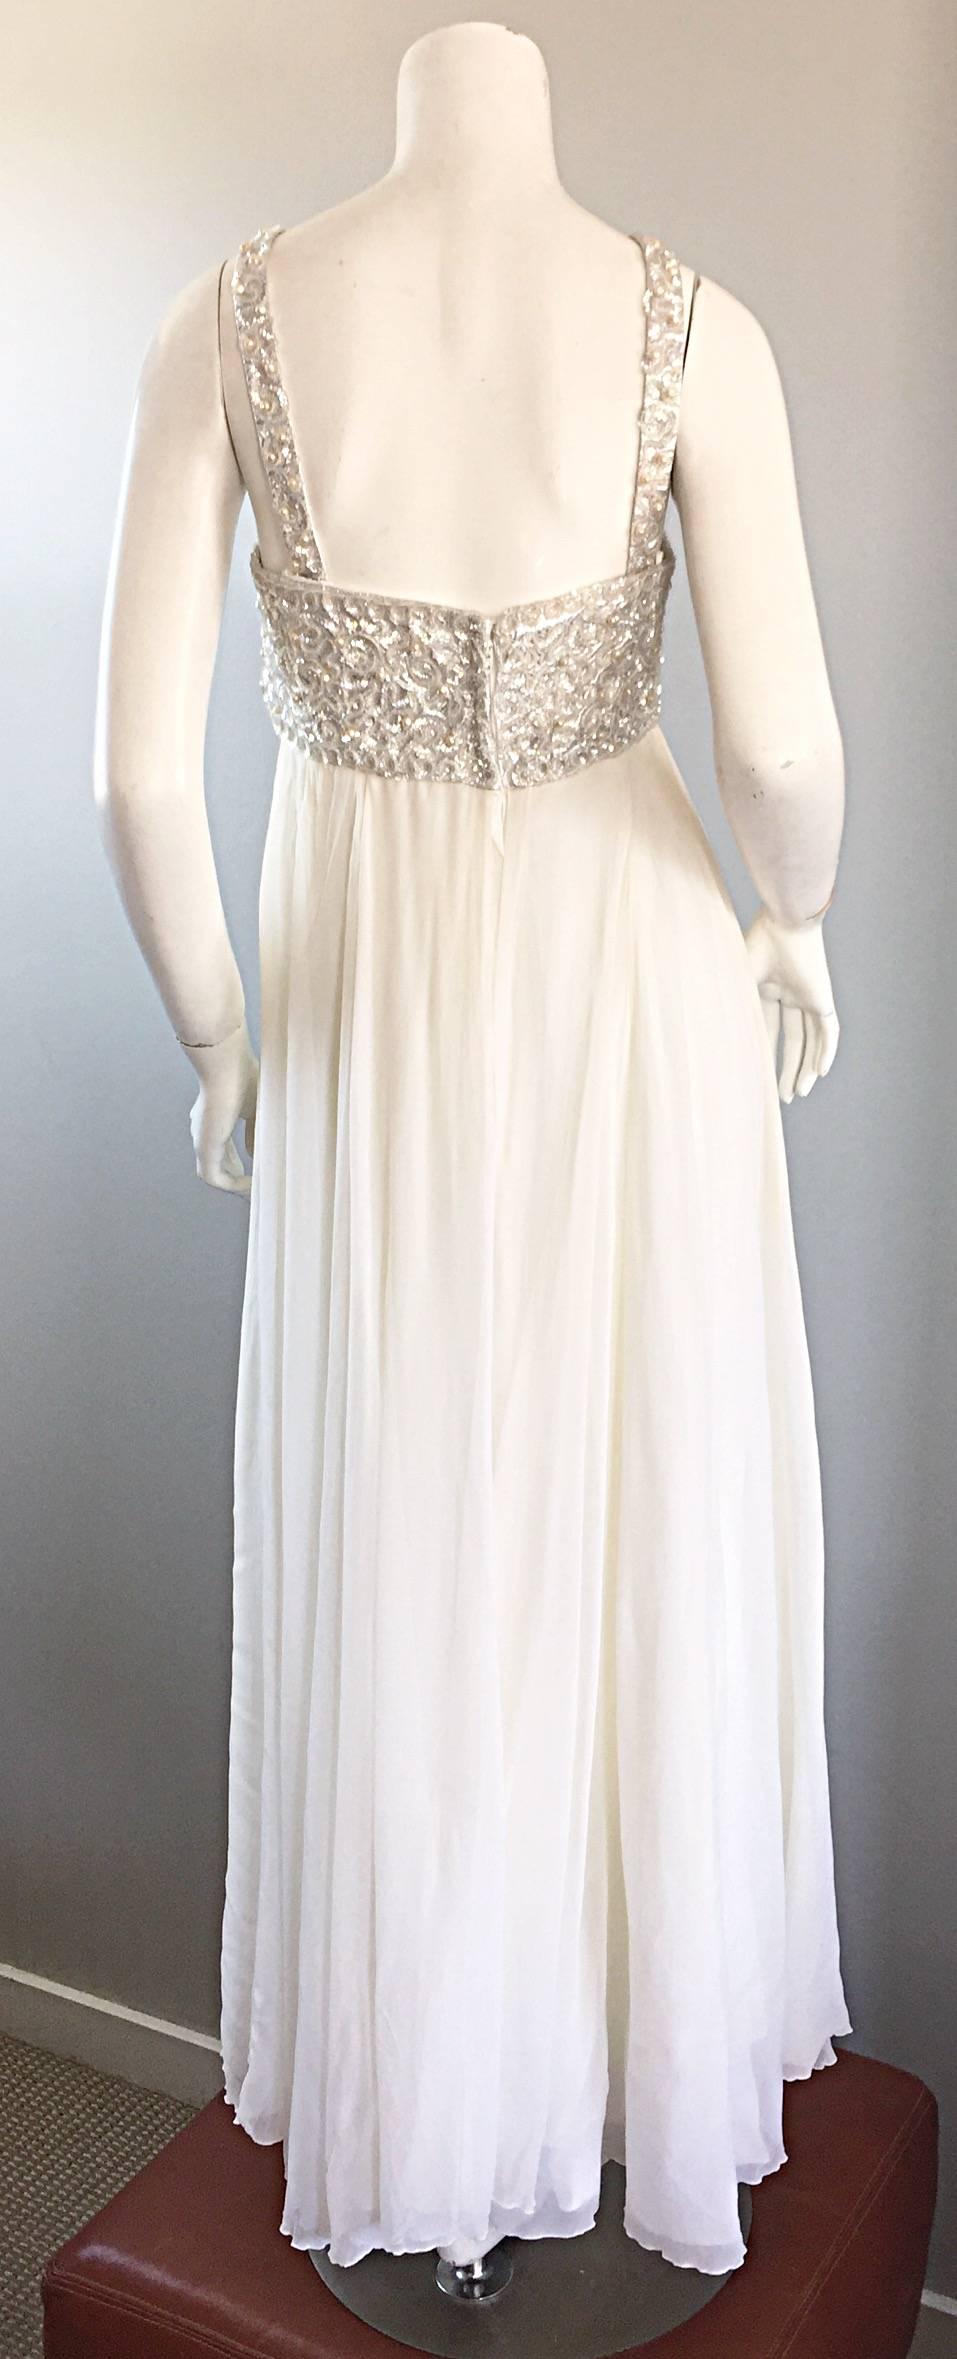 Women's Ethereal Emma Domb 1960s White Chiffon Sequins + Pearls 60s Empire Waist Gown 